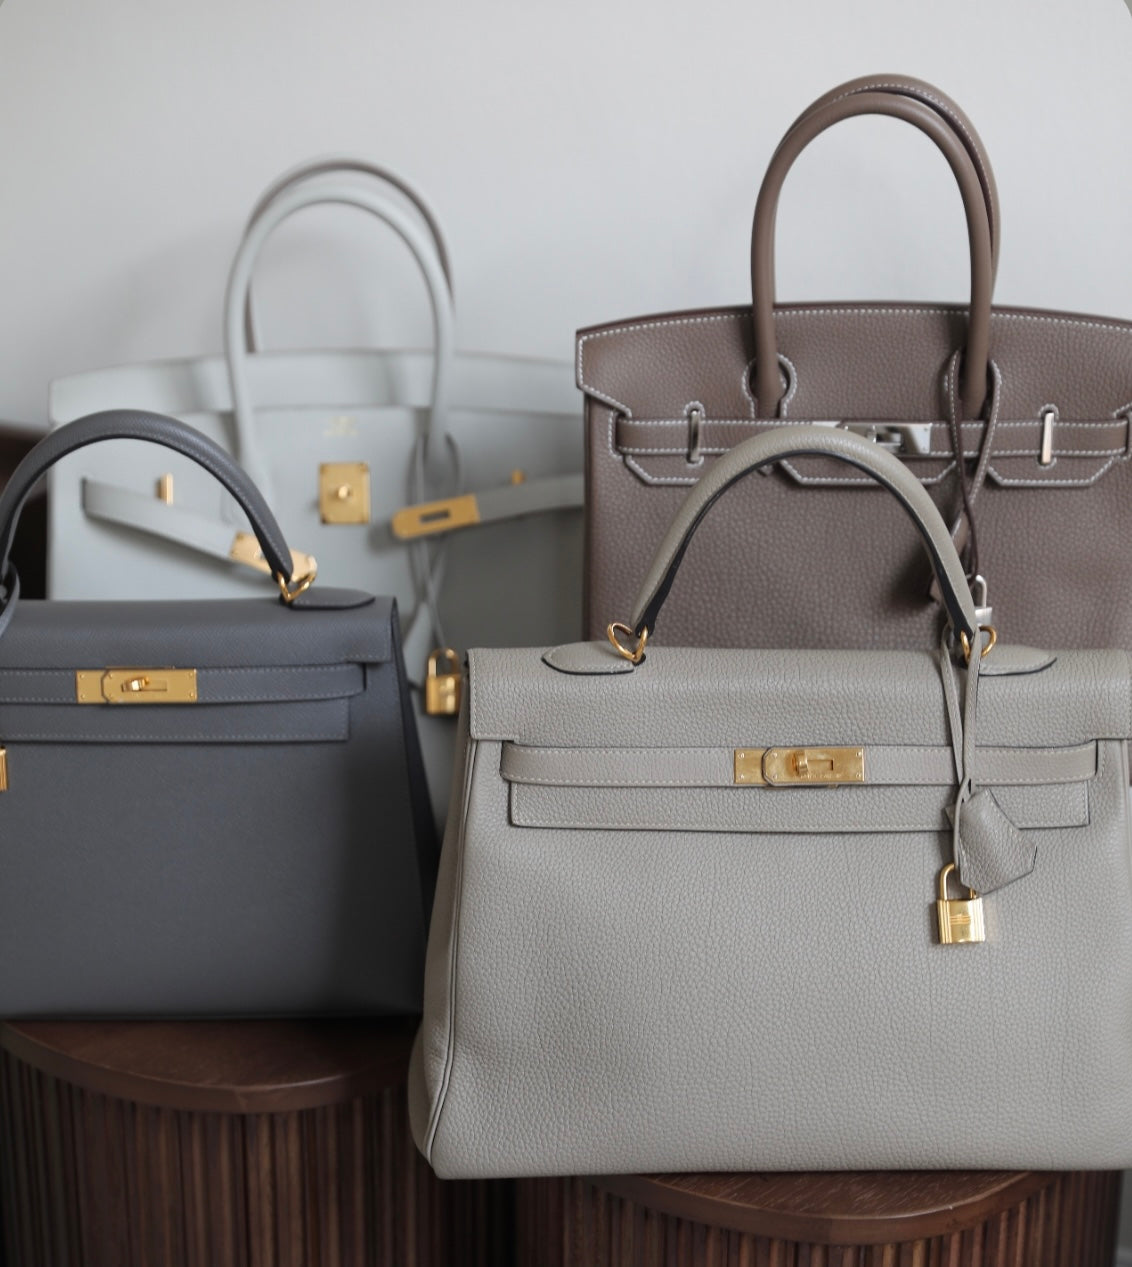 Hermes Birkin VS Kelly bag detailed comparison - difference in price, size,  history, styles, usage! 